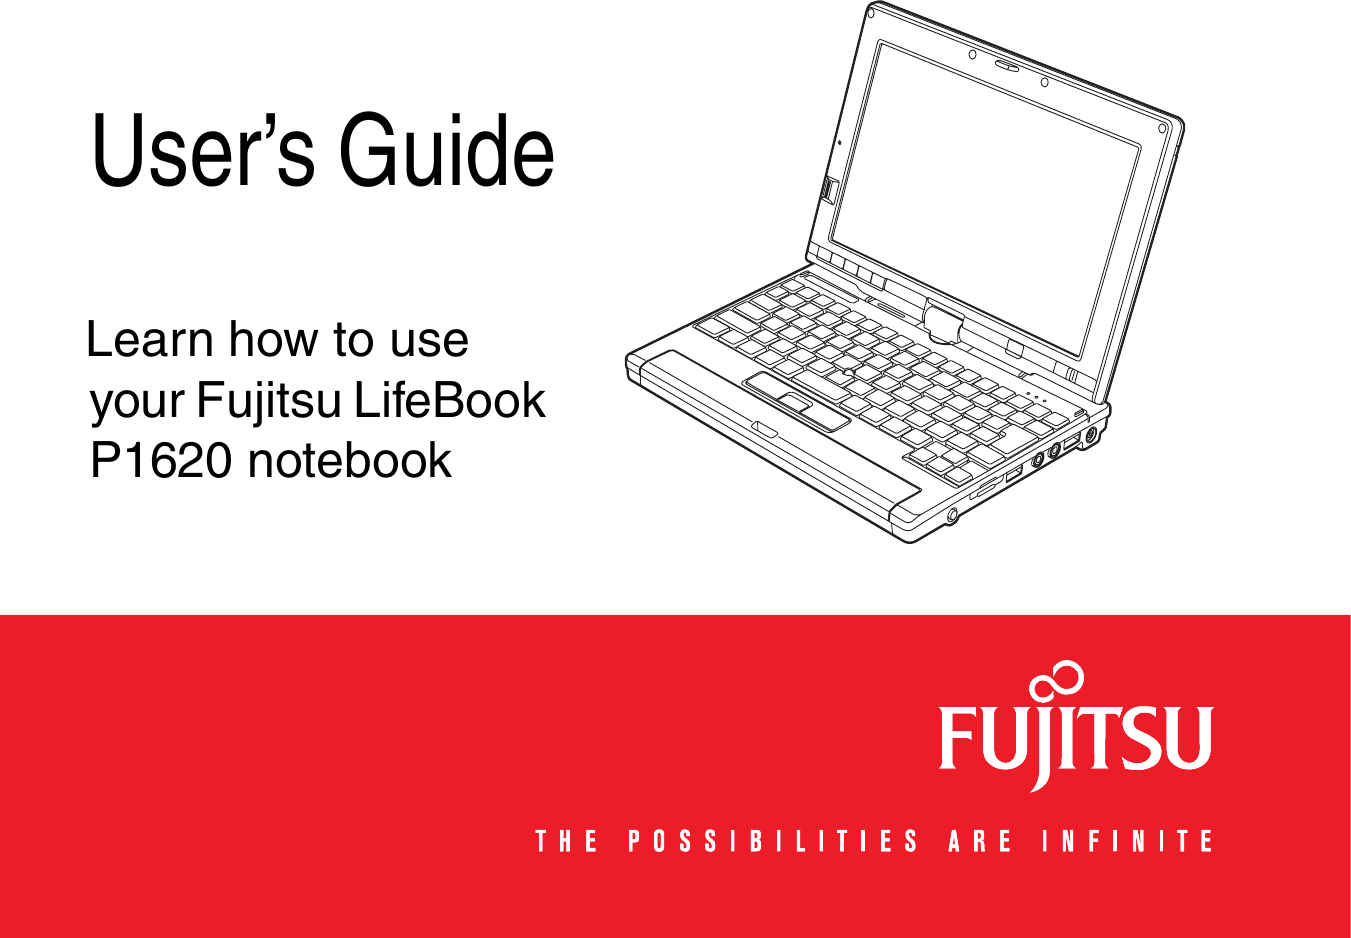   User’s GuideLearn how to use your Fujitsu LifeBook P1620 notebook